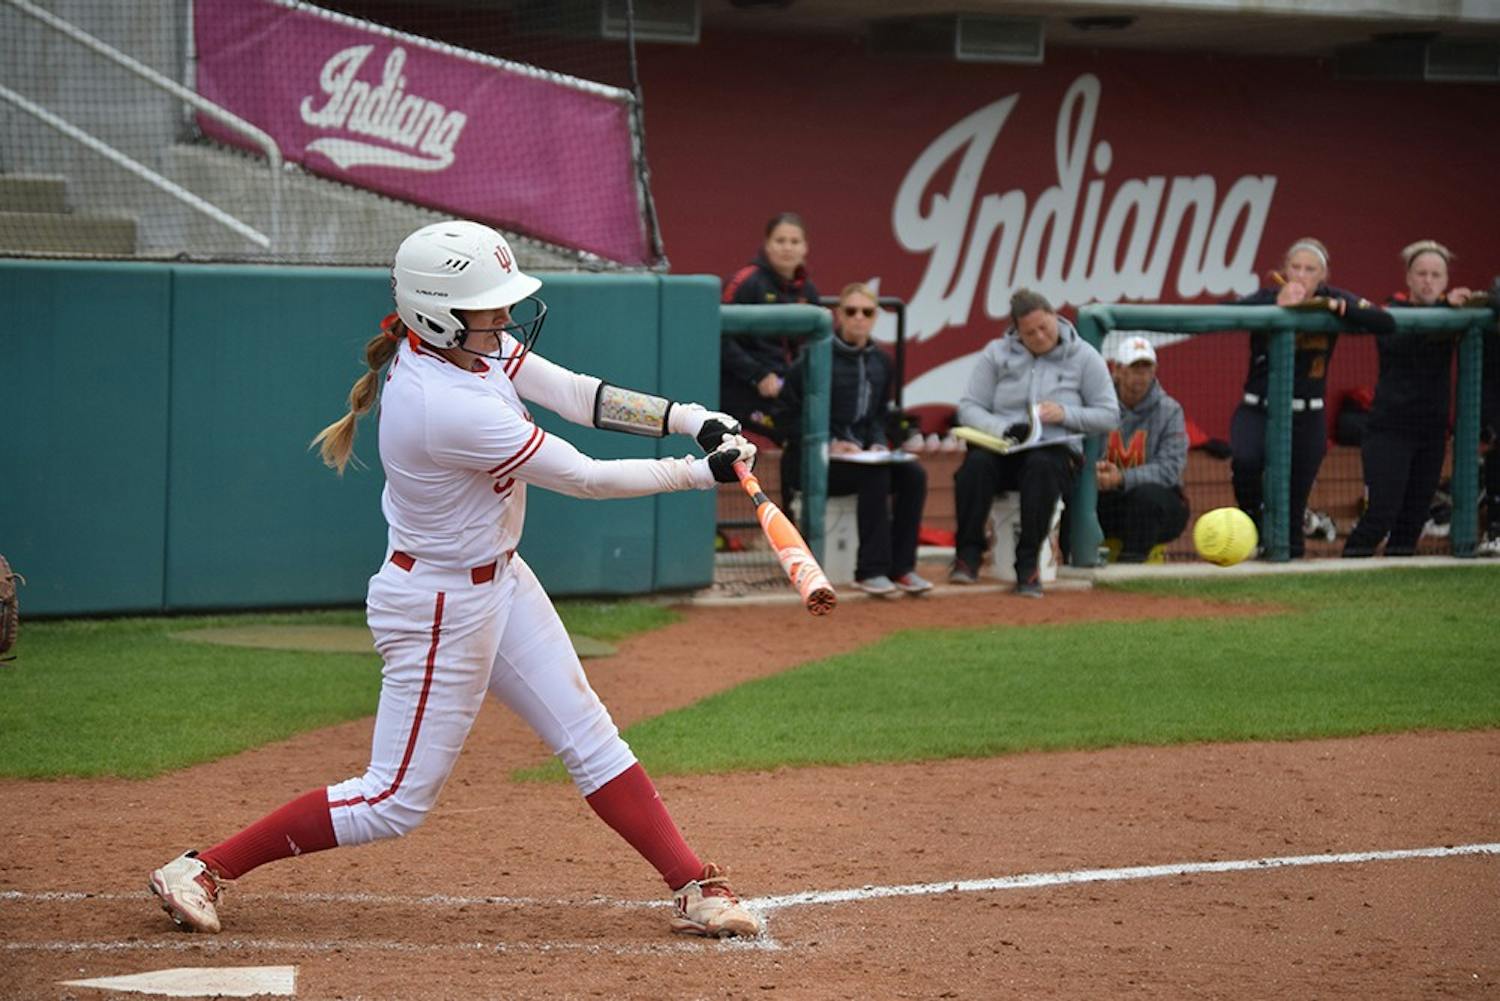 Senior Erin Lehman hits the ball in the second game against Maryland on Friday, April 21, 2017. The Hoosiers swept the Terrapins in the weekend series.